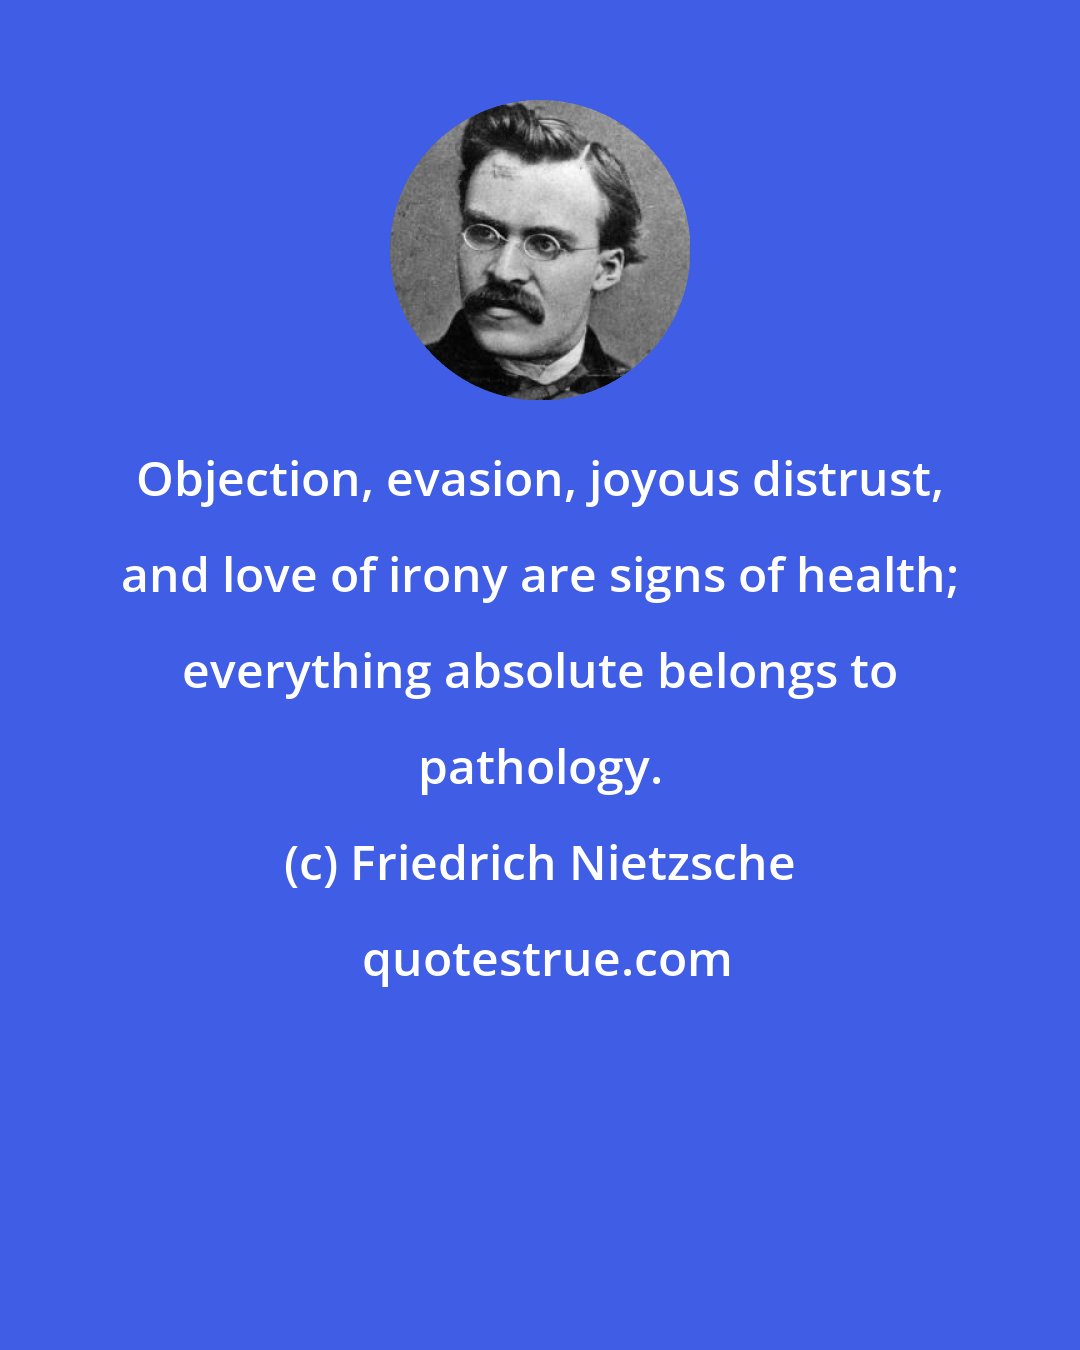 Friedrich Nietzsche: Objection, evasion, joyous distrust, and love of irony are signs of health; everything absolute belongs to pathology.